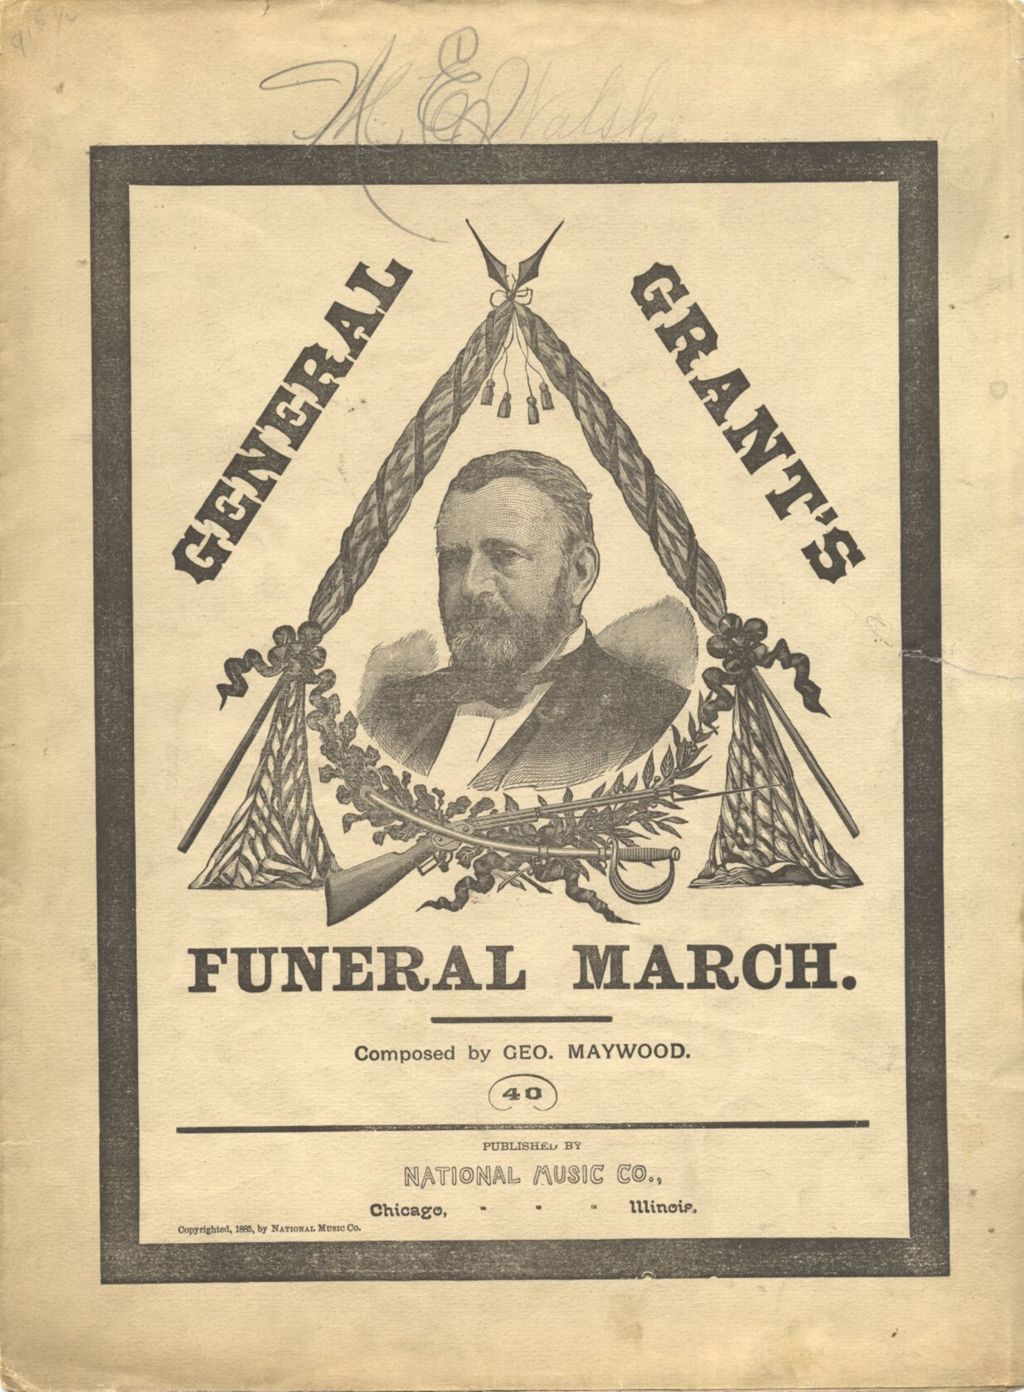 Miniature of General Grant's Funeral March